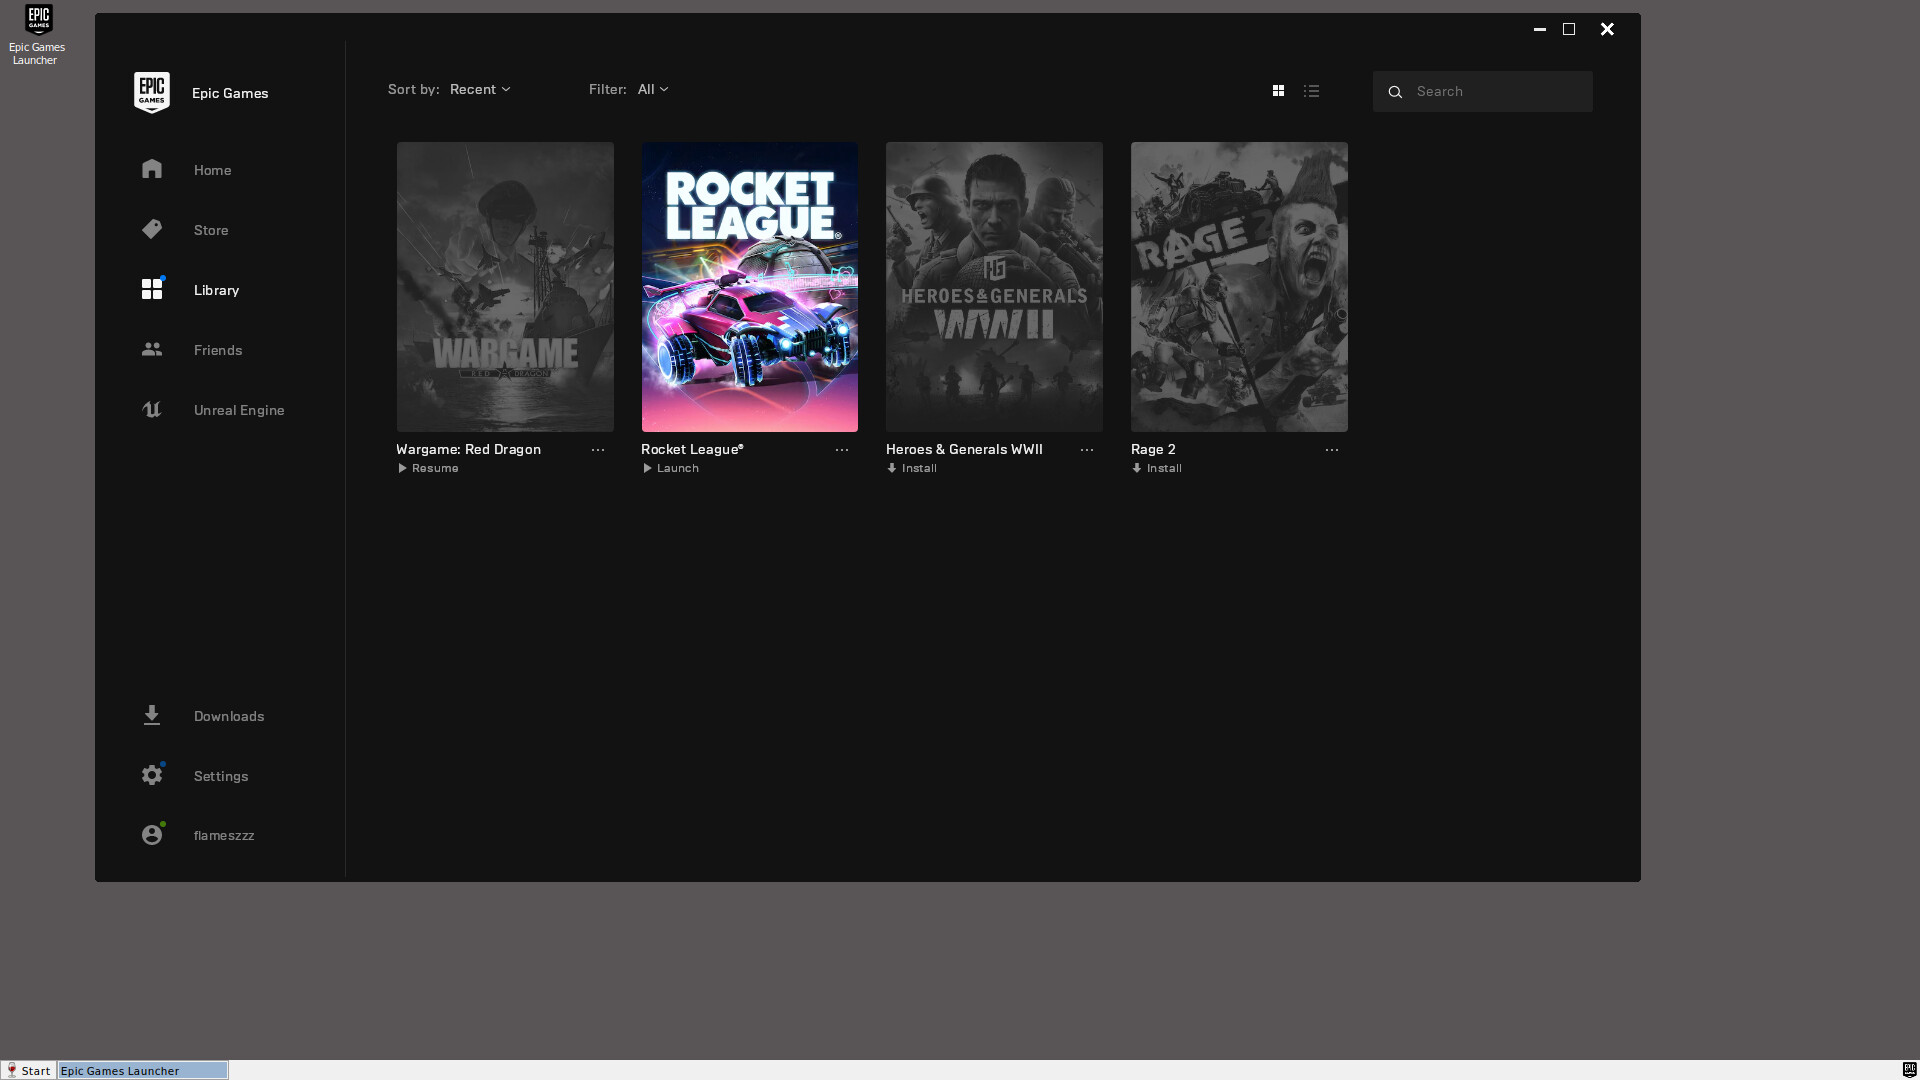 How To Use The Epic Games Launcher To Download Games